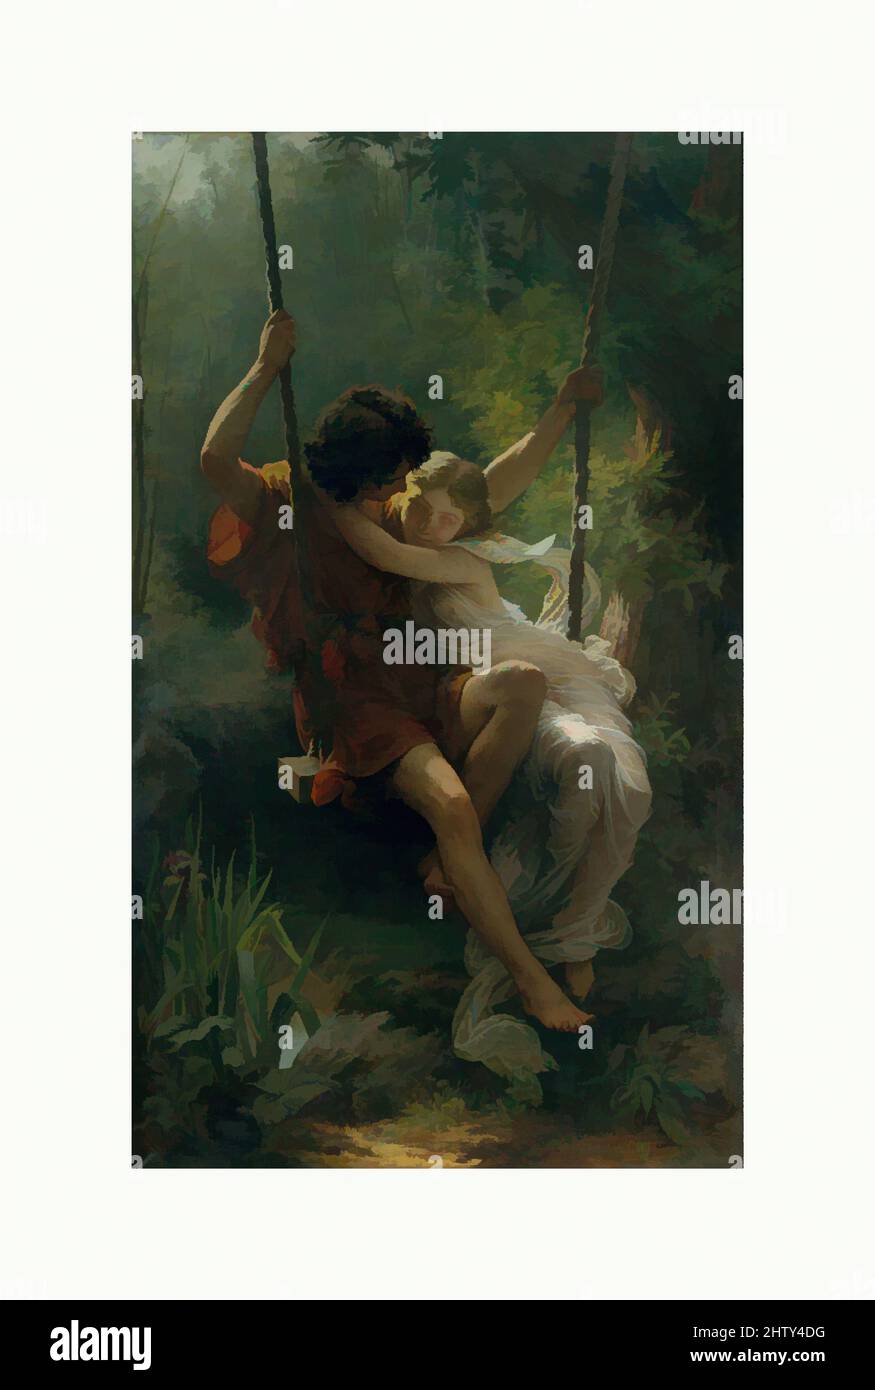 Art inspired by Springtime, 1873, Oil on canvas, 84 x 50 in. (213.4 x 127 cm), Paintings, Pierre-Auguste Cot (French, Bédarieux 1837–1883 Paris), This flirtatious duo in classicizing dress, painted with notable technical finesse, reflects Cot’s allegiance to the academic style of his, Classic works modernized by Artotop with a splash of modernity. Shapes, color and value, eye-catching visual impact on art. Emotions through freedom of artworks in a contemporary way. A timeless message pursuing a wildly creative new direction. Artists turning to the digital medium and creating the Artotop NFT Stock Photo